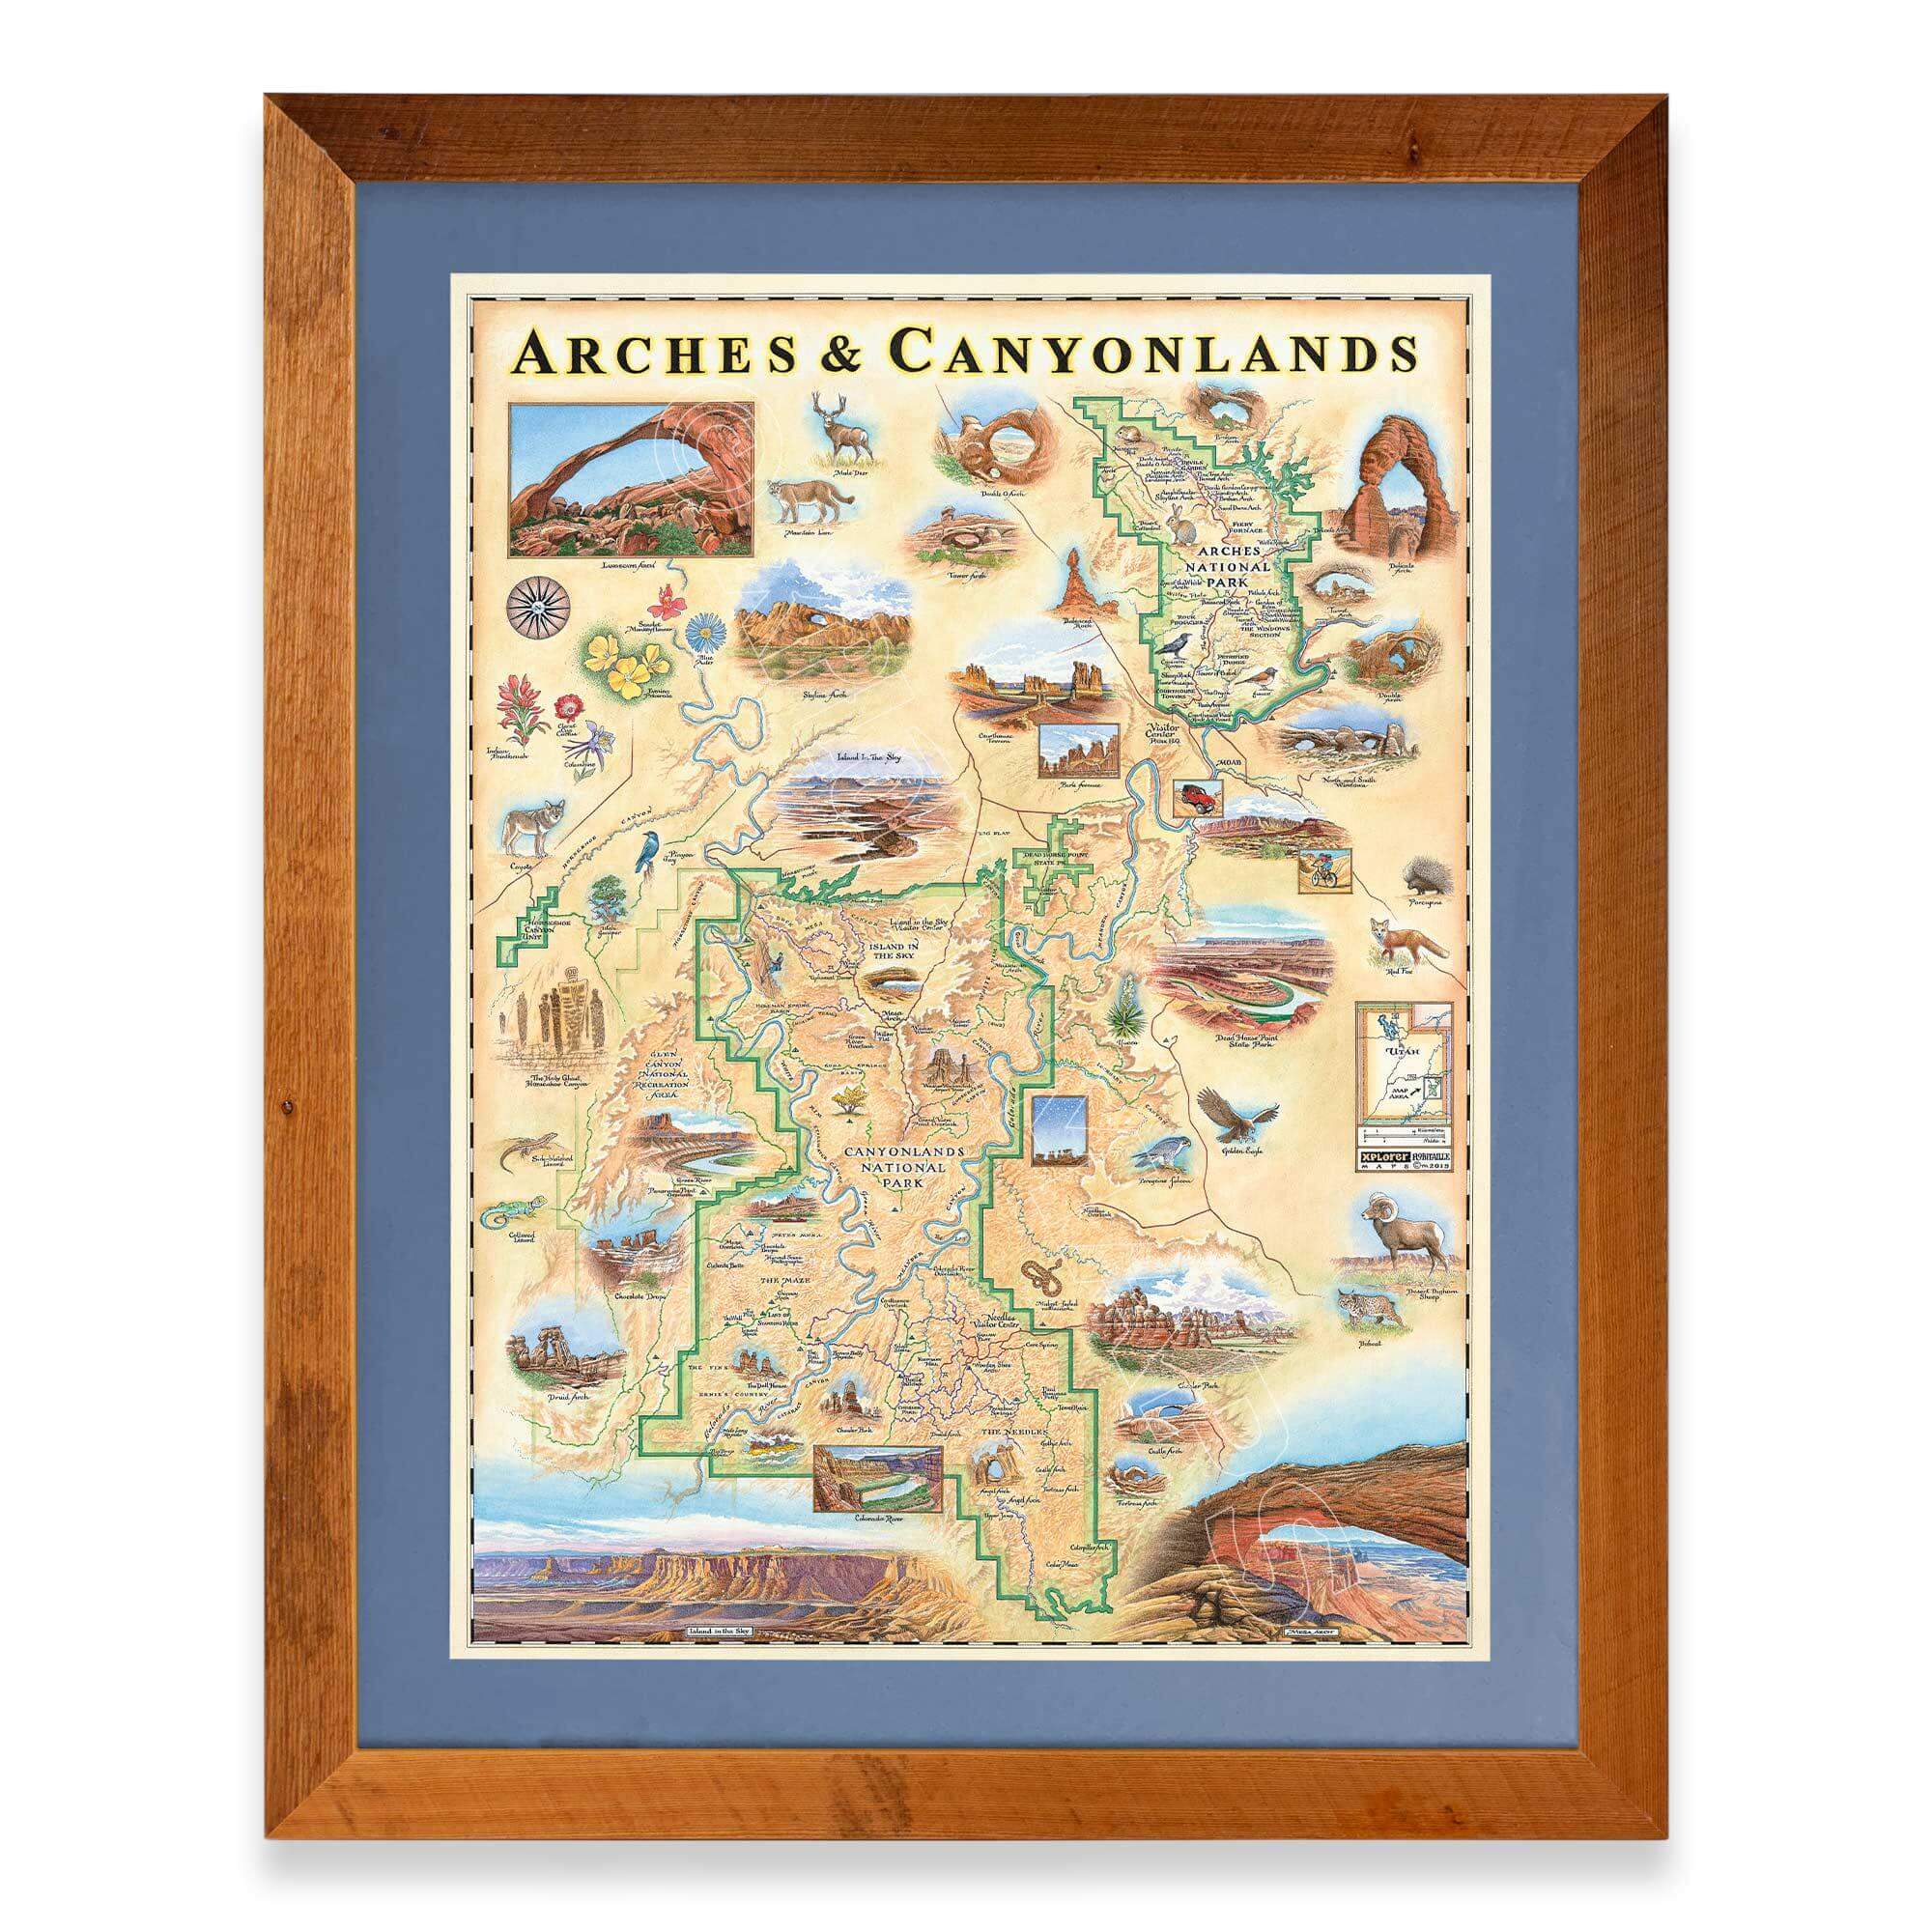 Arches & Canyonlands National Park hand-drawn map in a Montana Flathead Lake reclaimed larch wood frame and blue mat. 